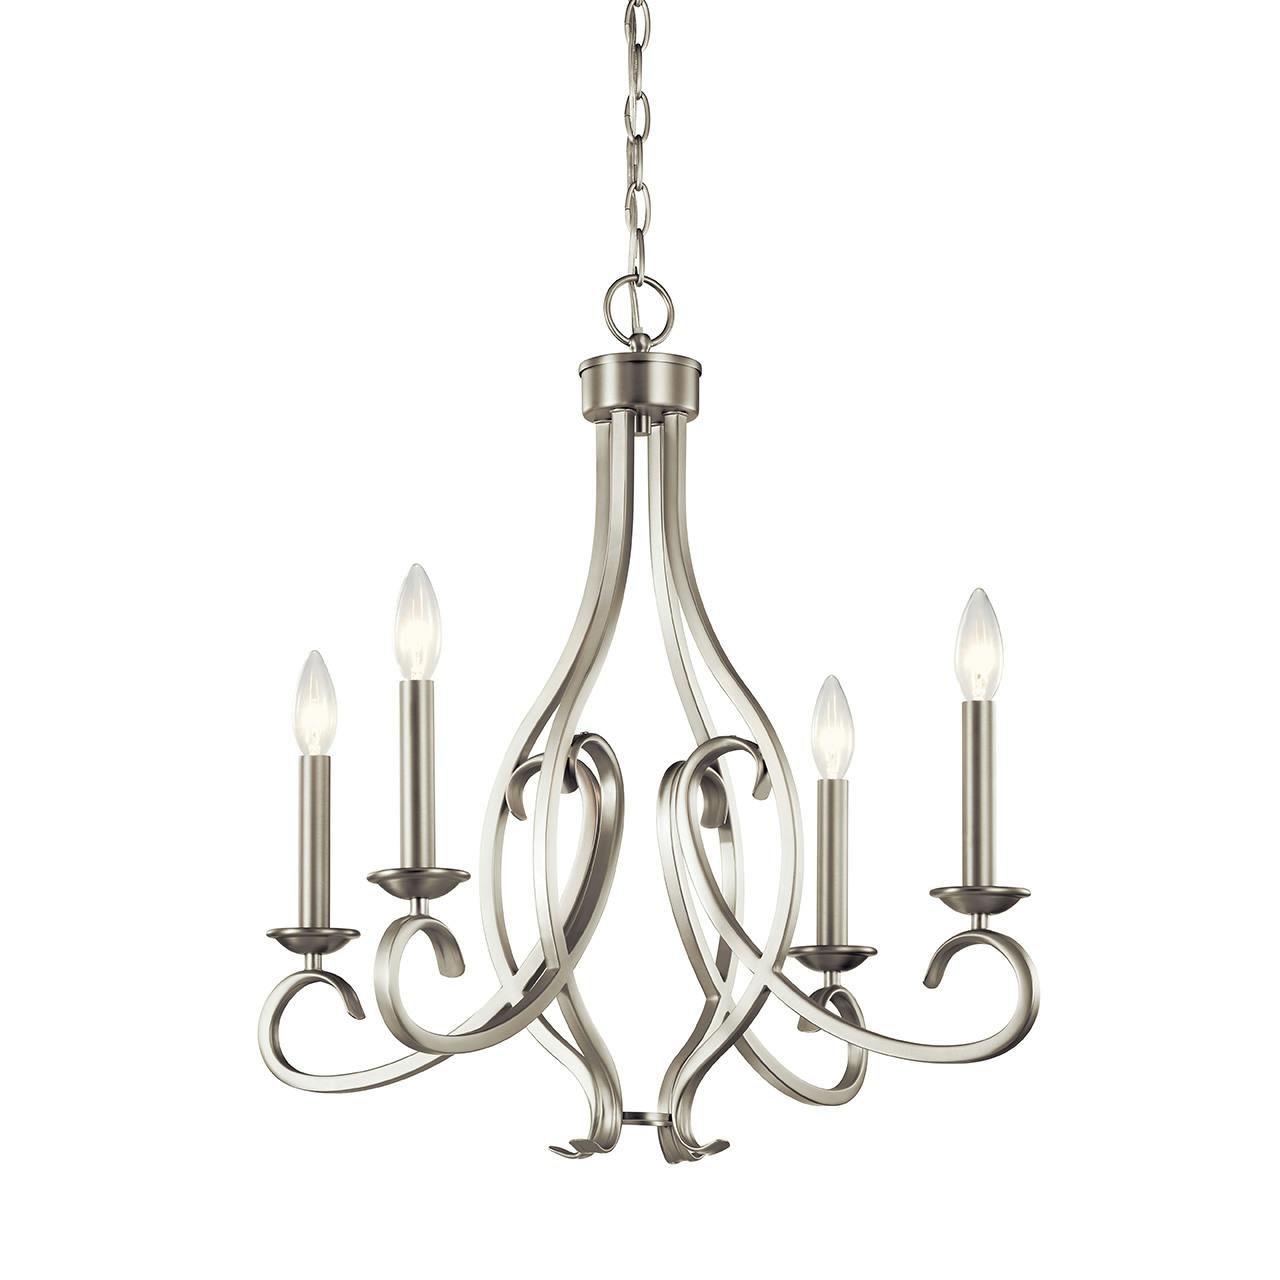 Ania 4 Light Chandelier Brushed Nickel without the canopy on a white background